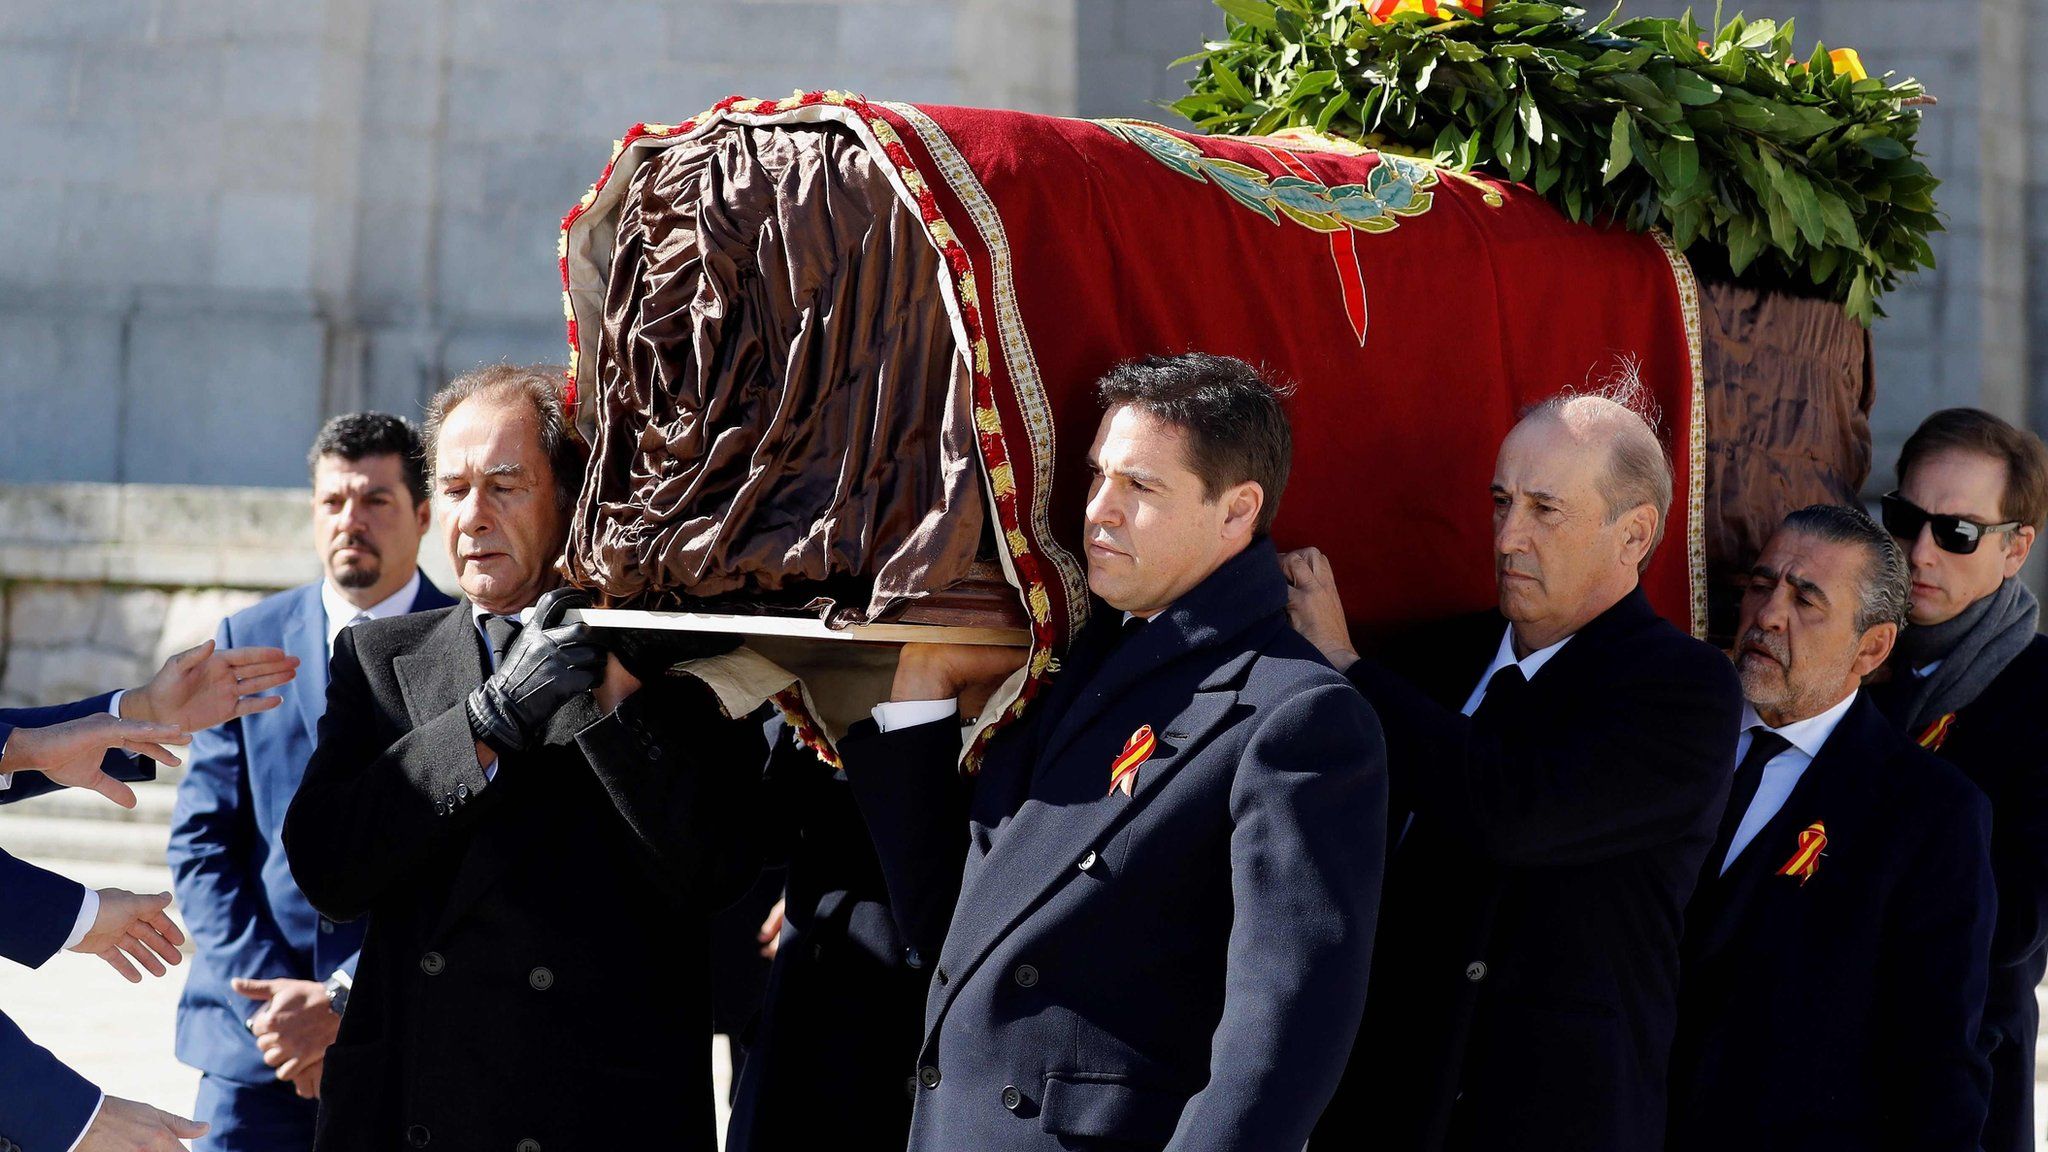 Relatives carry the draped coffin from the basilica to be loaded into a hearse